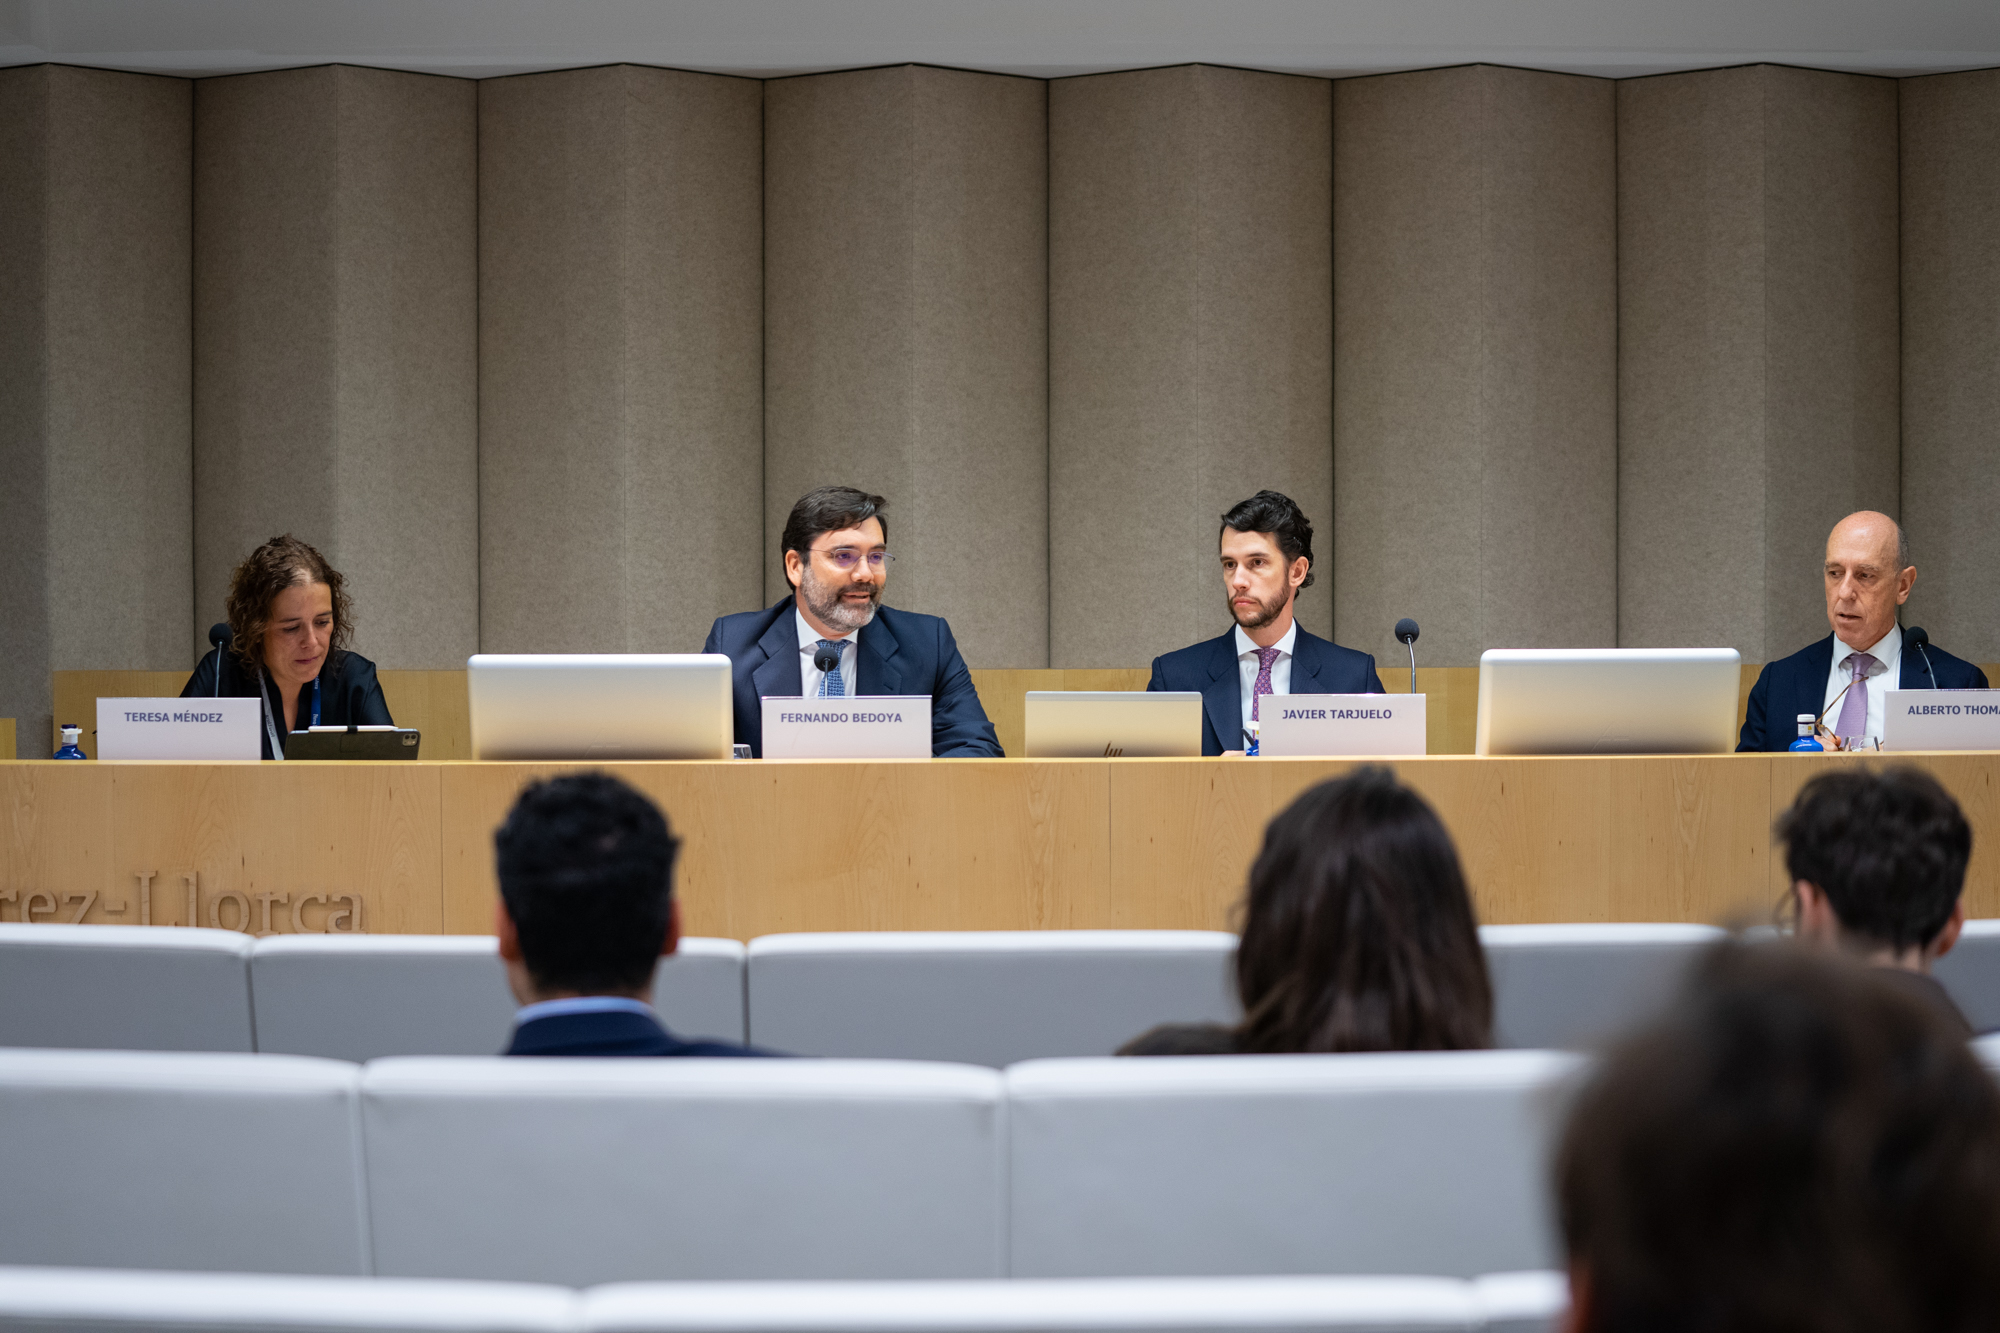 Pérez-Llorca and Fideres analyse the risks and opportunities of securities litigation